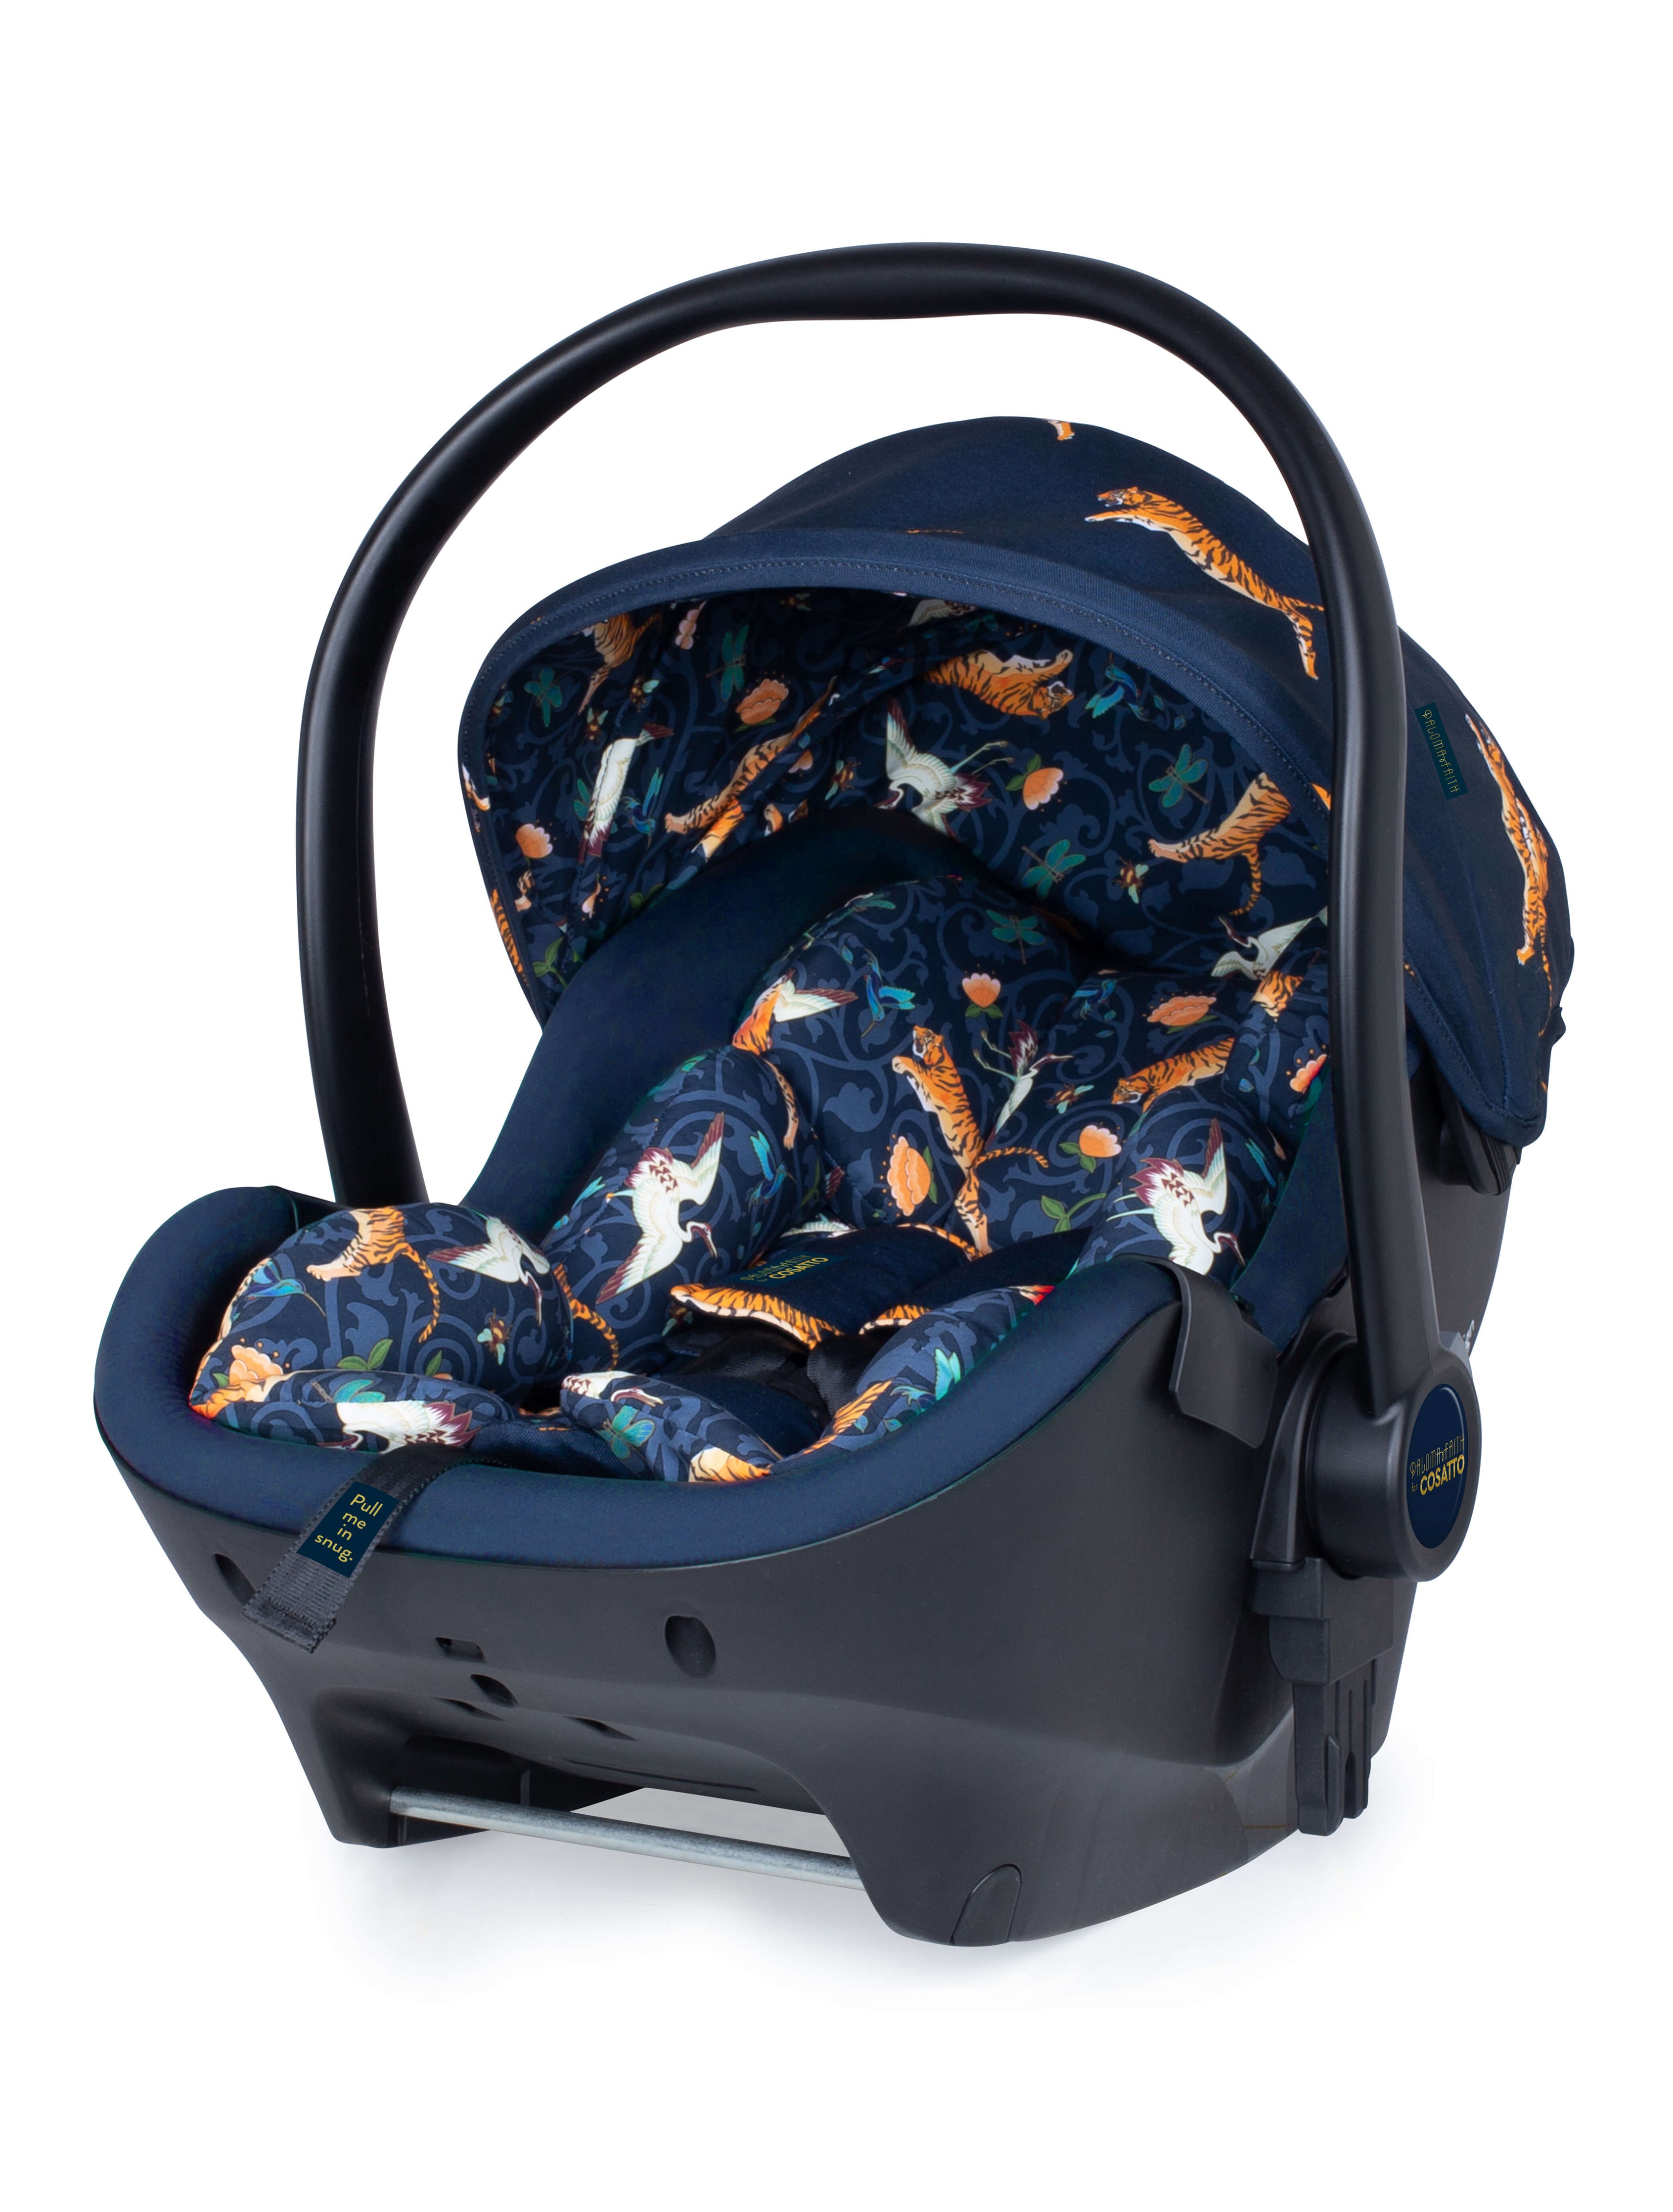 Port I-Size 0+ Car Seat On The Prowl